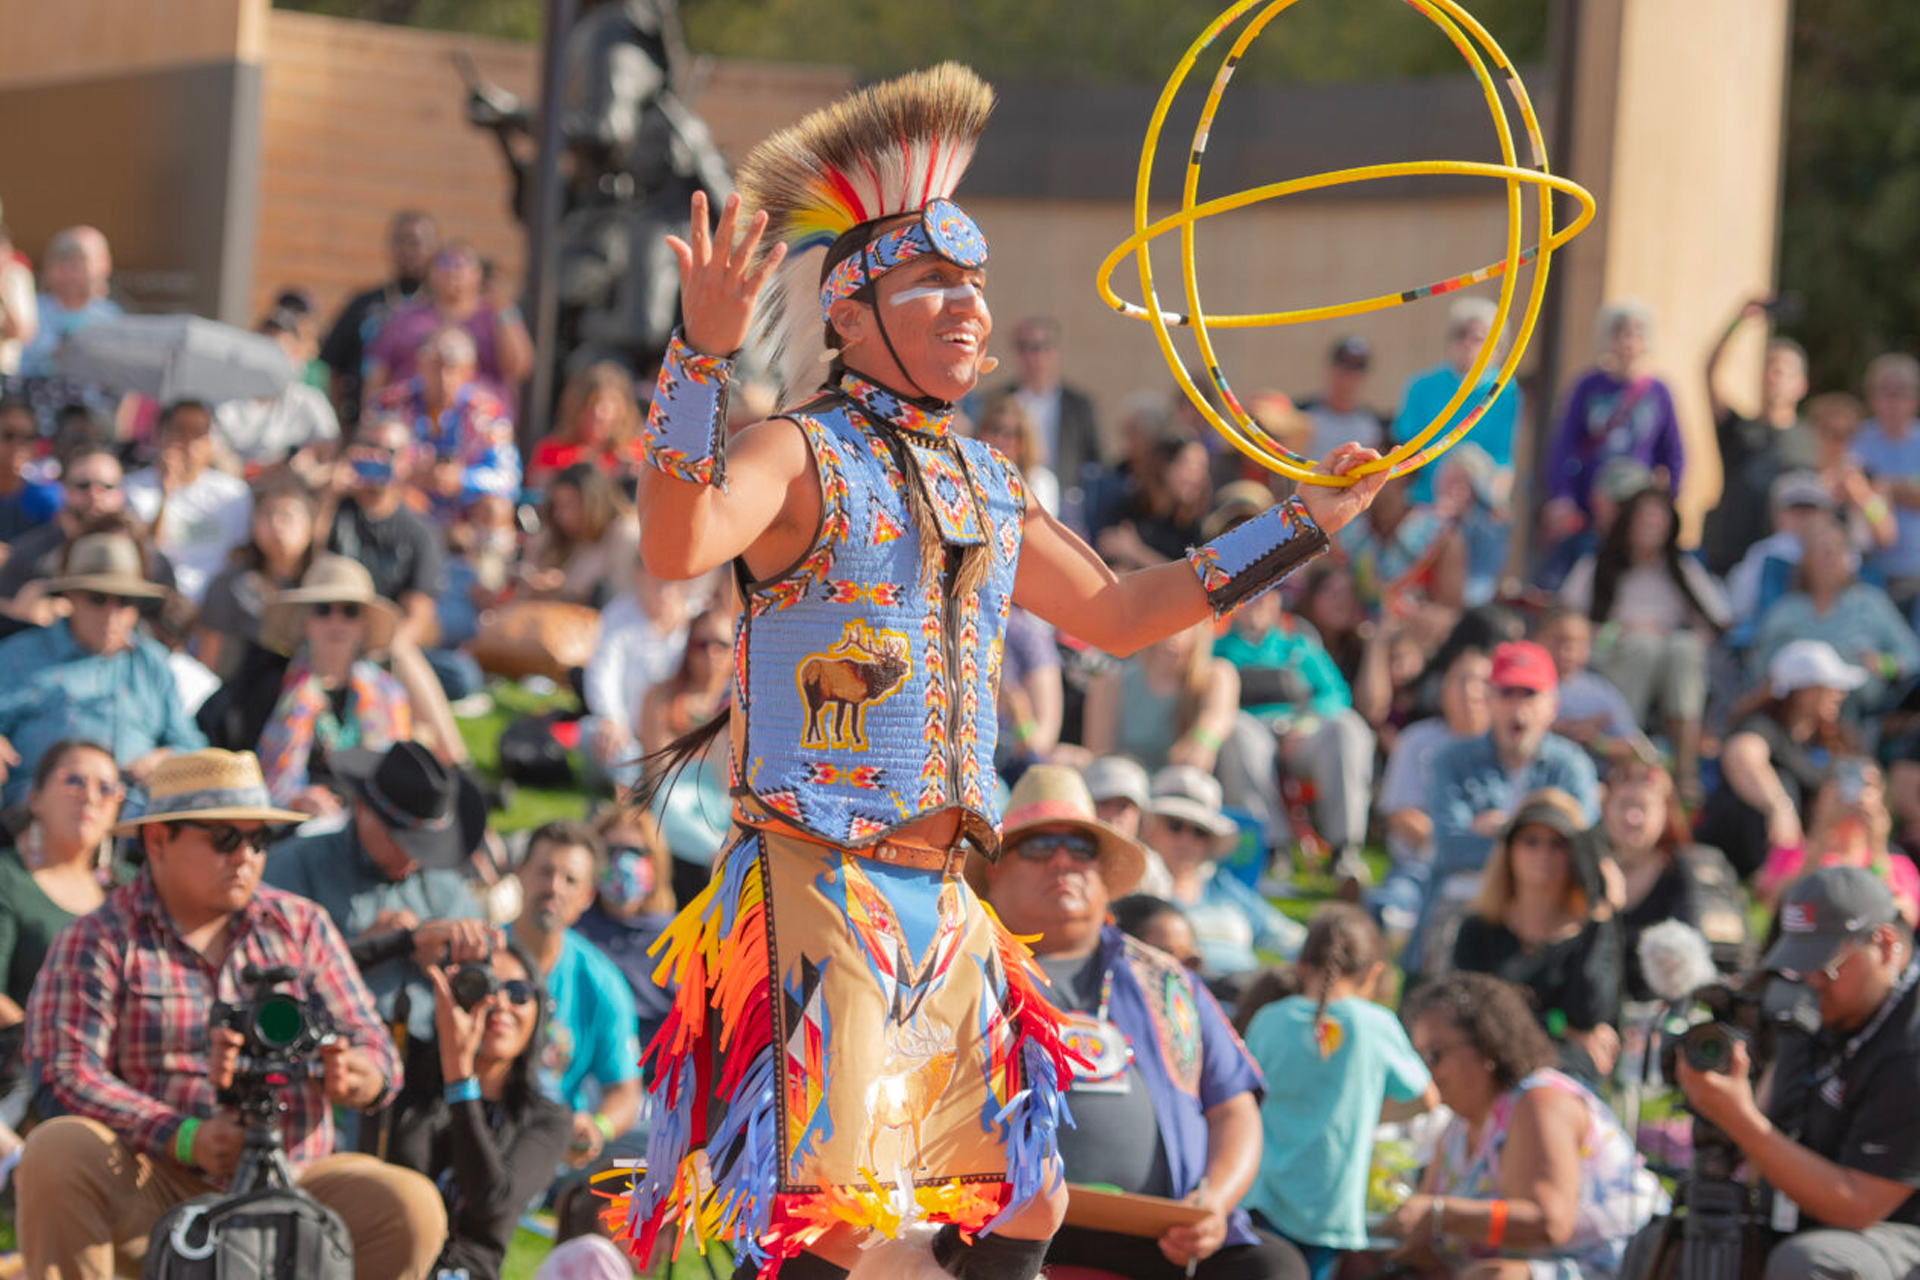 A Native dancer with a hoop in front of a crowd.